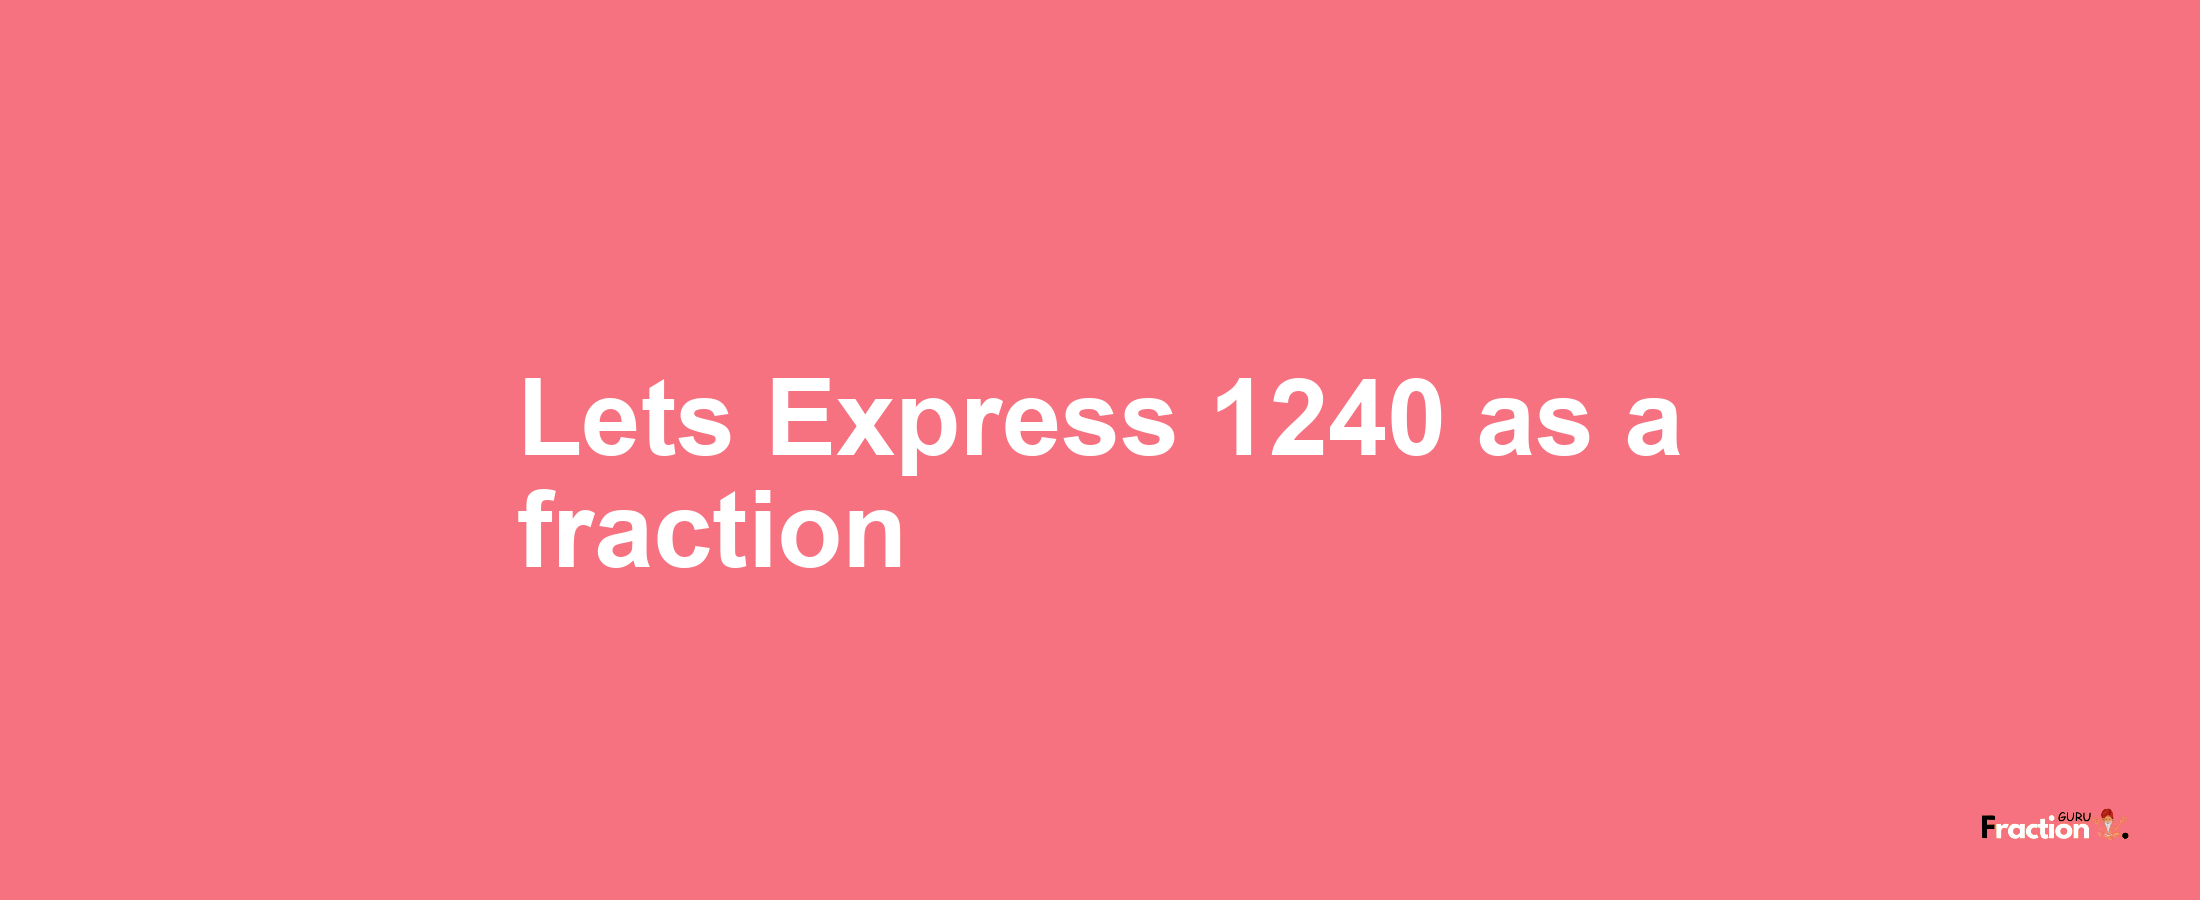 Lets Express 1240 as afraction